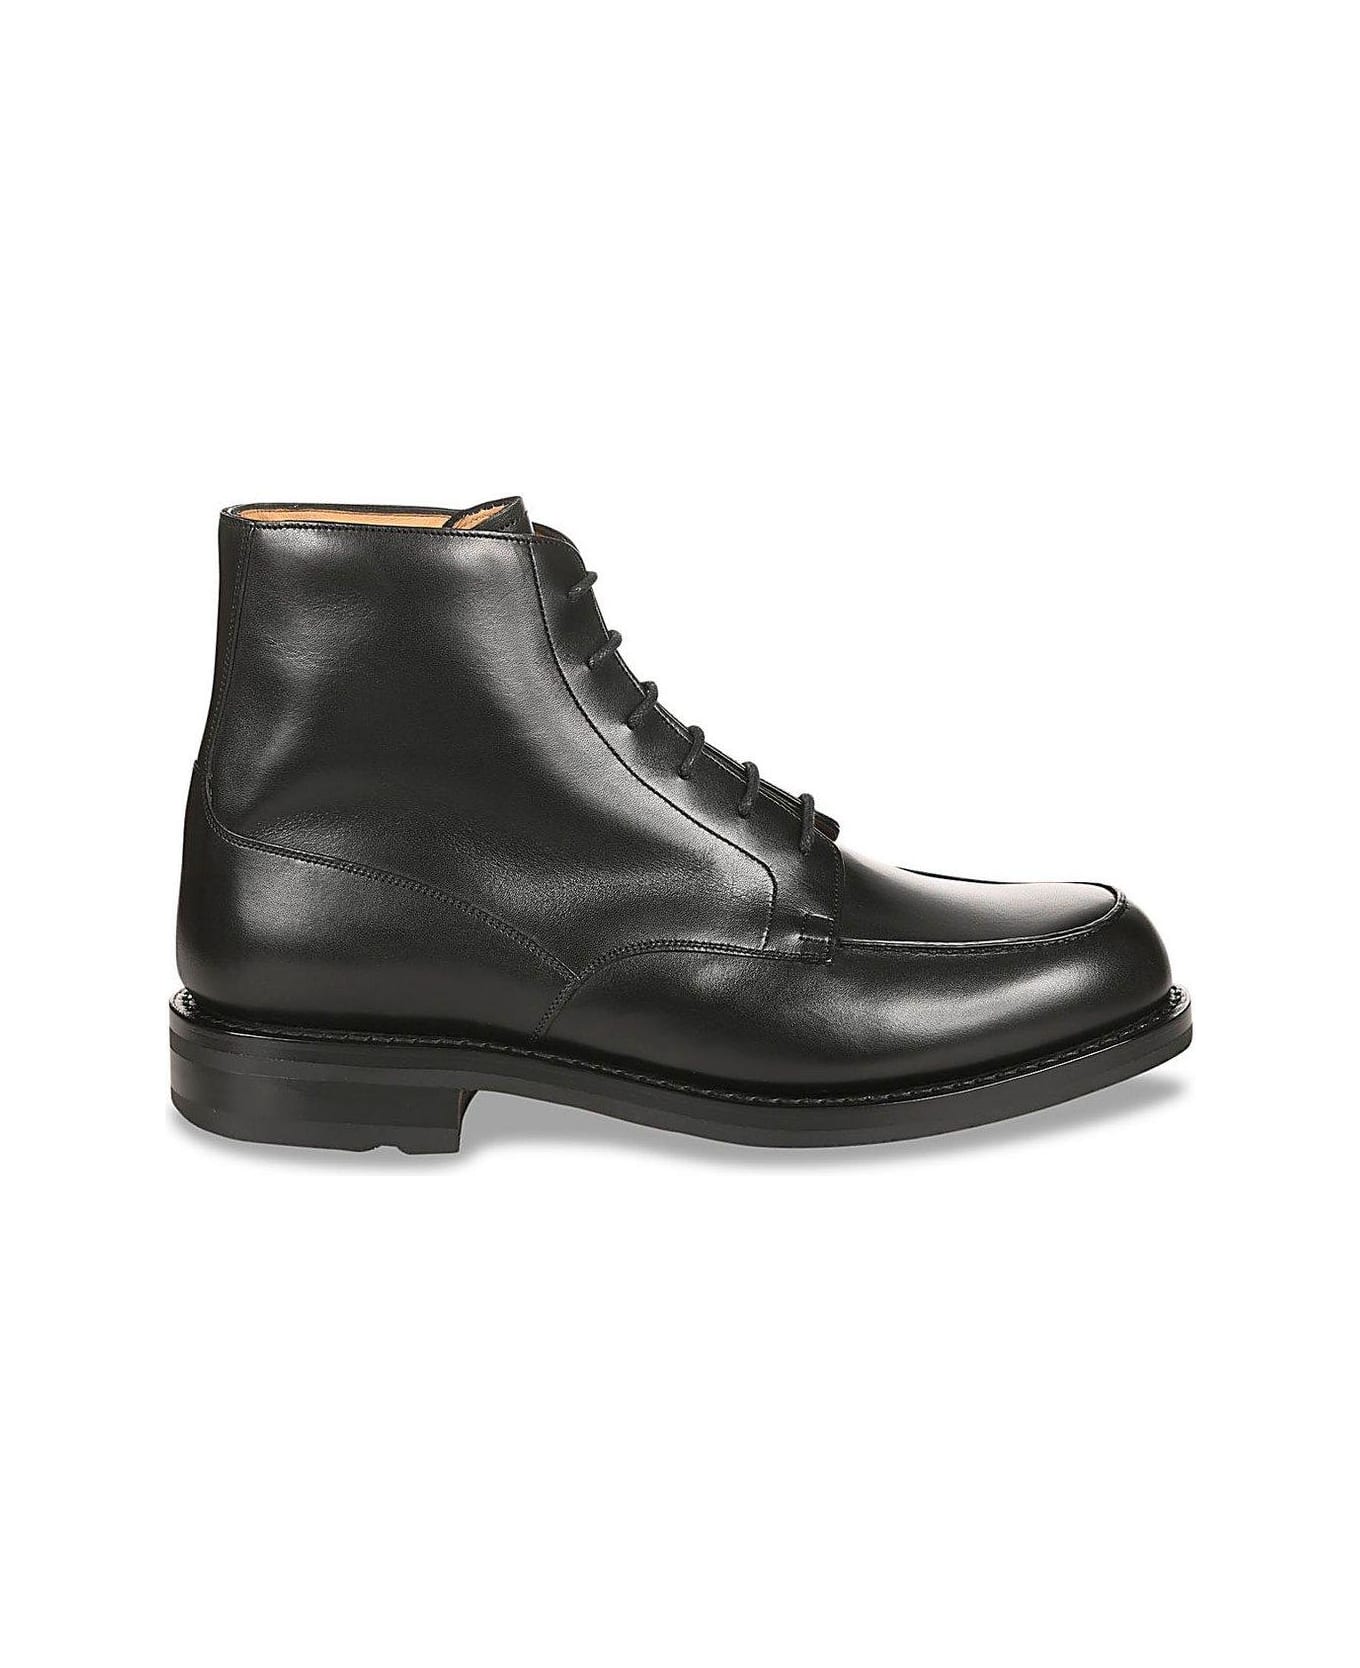 Church's Round-toe Lace-up Ankle Boots - Nero ブーツ